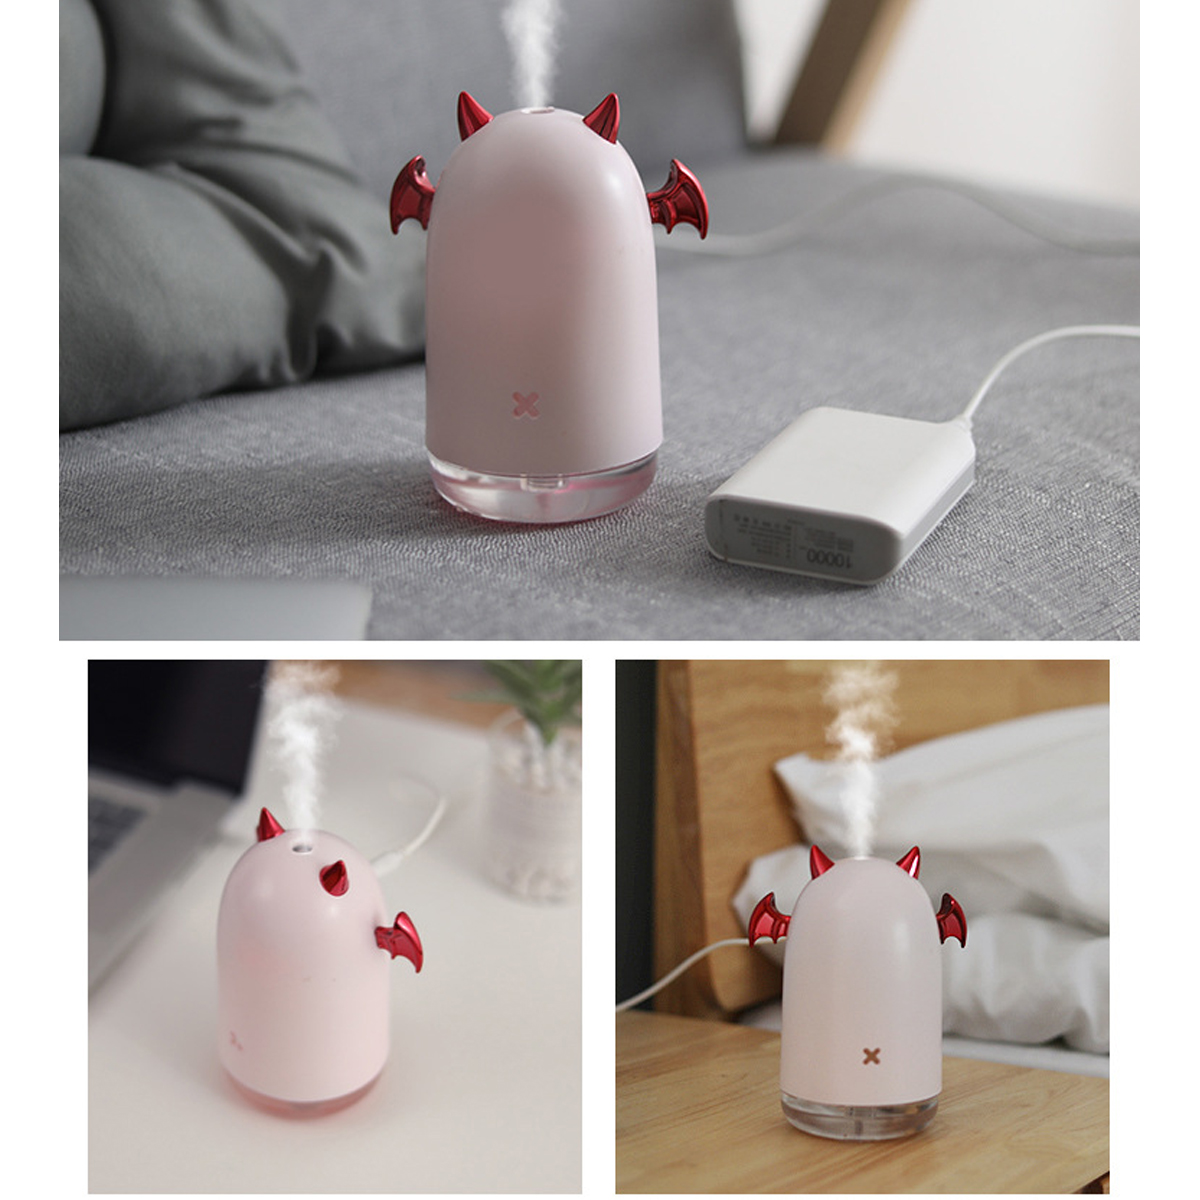 7-LED-Humidifier-USB-Purifier-Mist-Aroma-Essential-Oil-Diffuser-Halloween-Gift-1651094-7